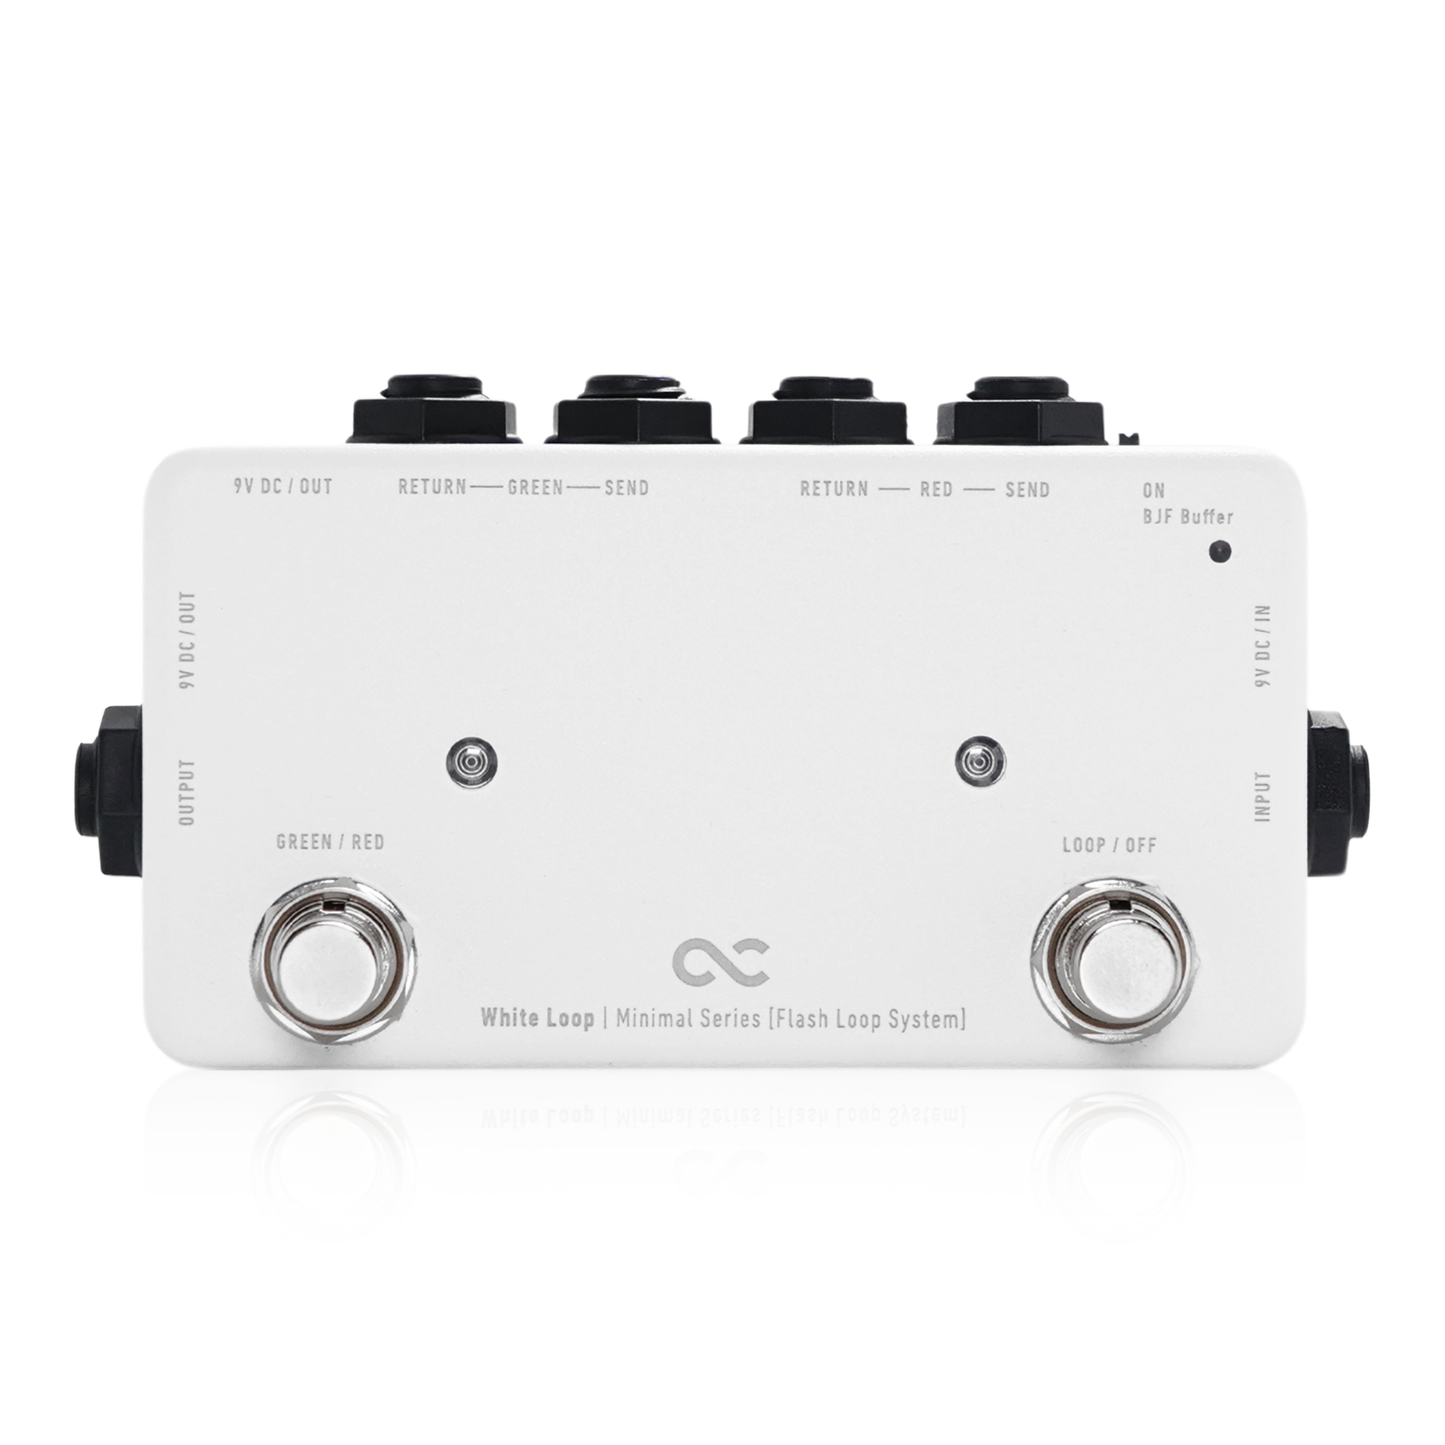 One Control Minimal Series White Loop with BJF Buffer